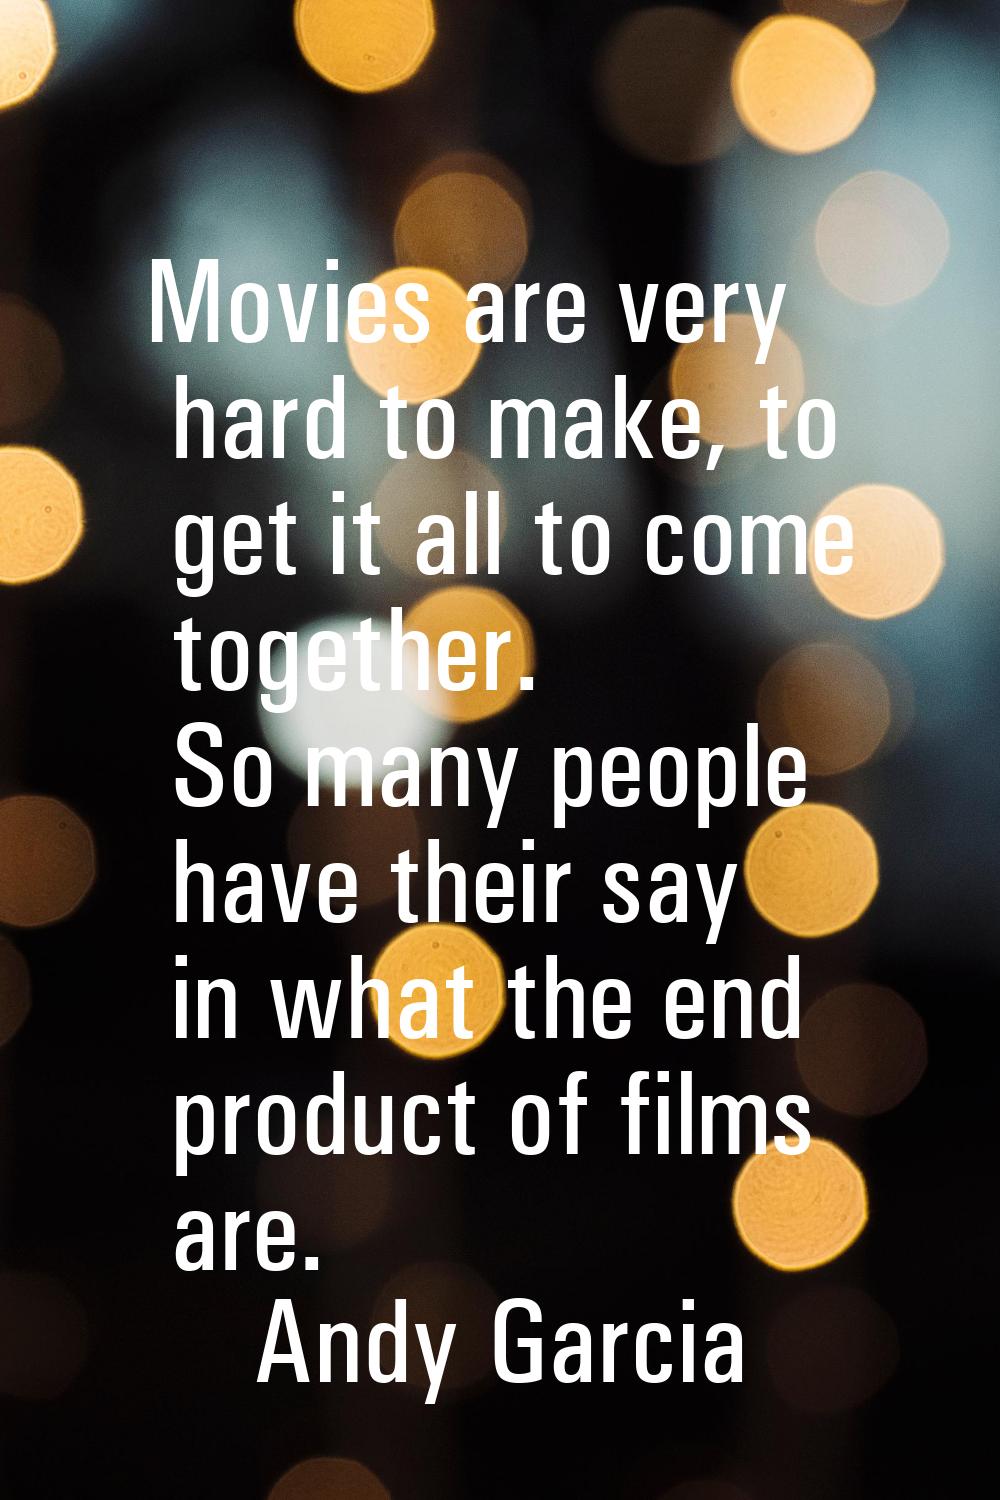 Movies are very hard to make, to get it all to come together. So many people have their say in what